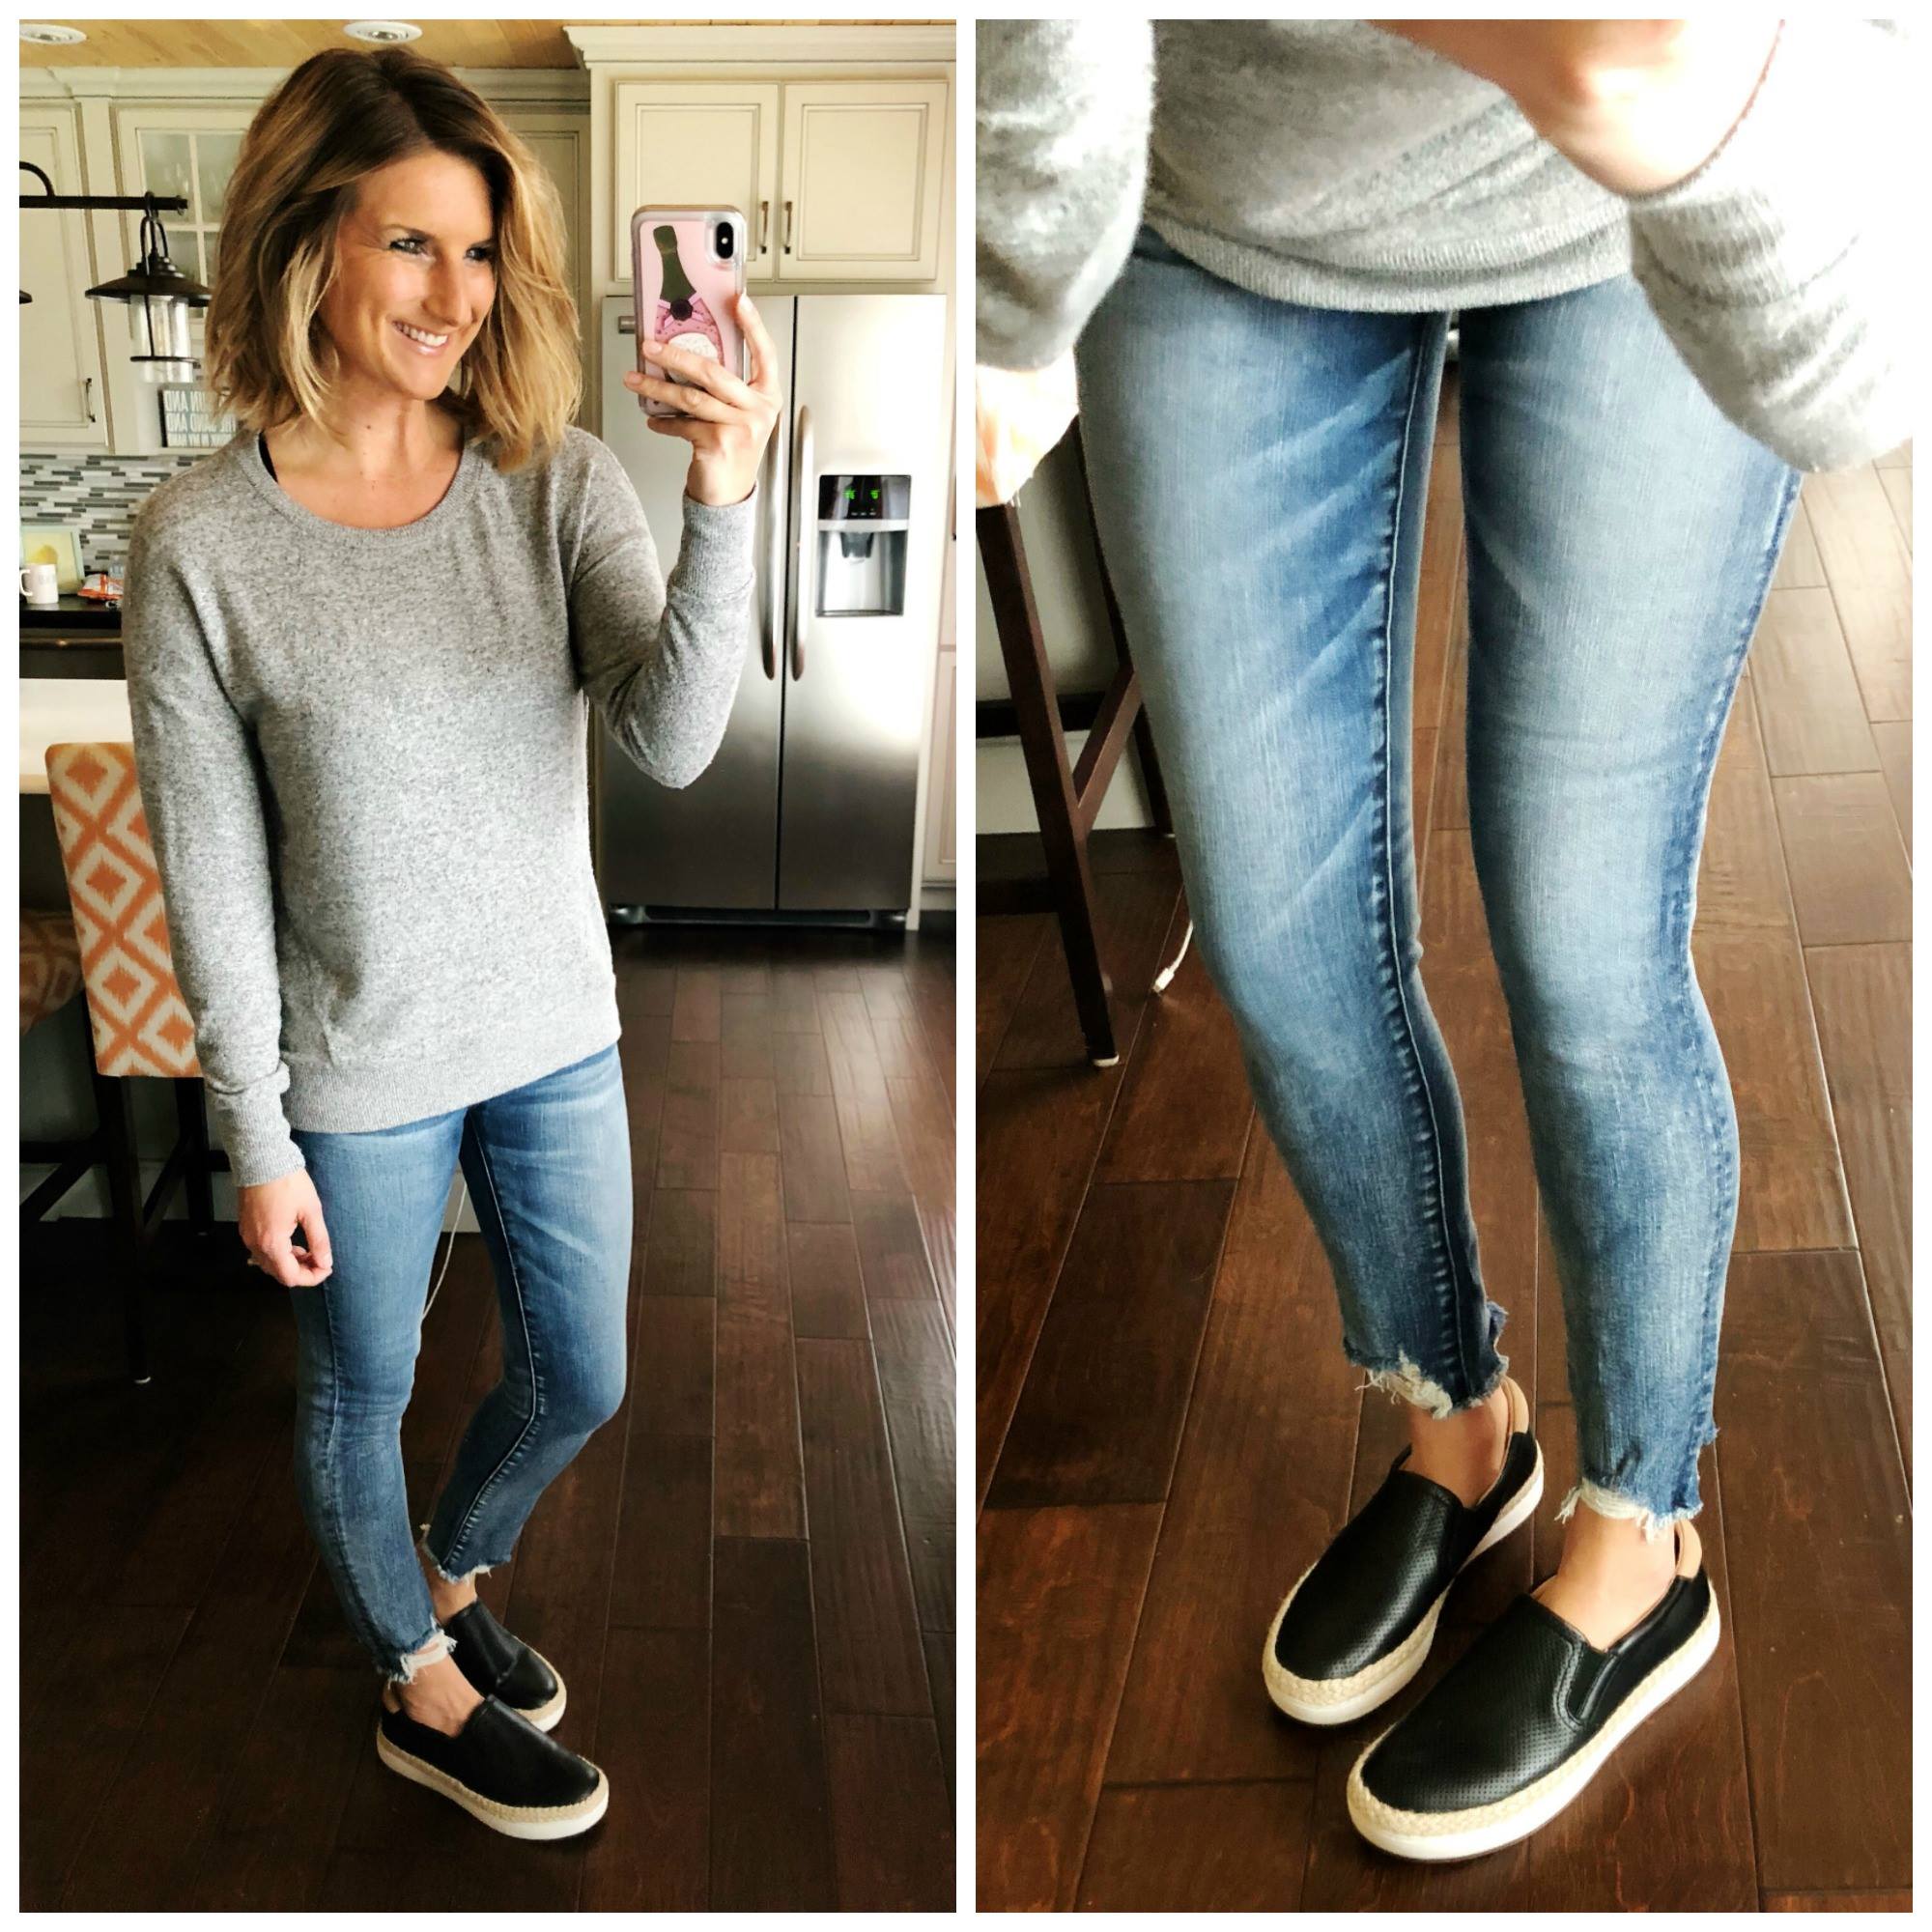 How to Style Cropped Jeggings // Lightweight Sweater + Released Hem Jeggings + Slip On Sneakers // Spring Fashion